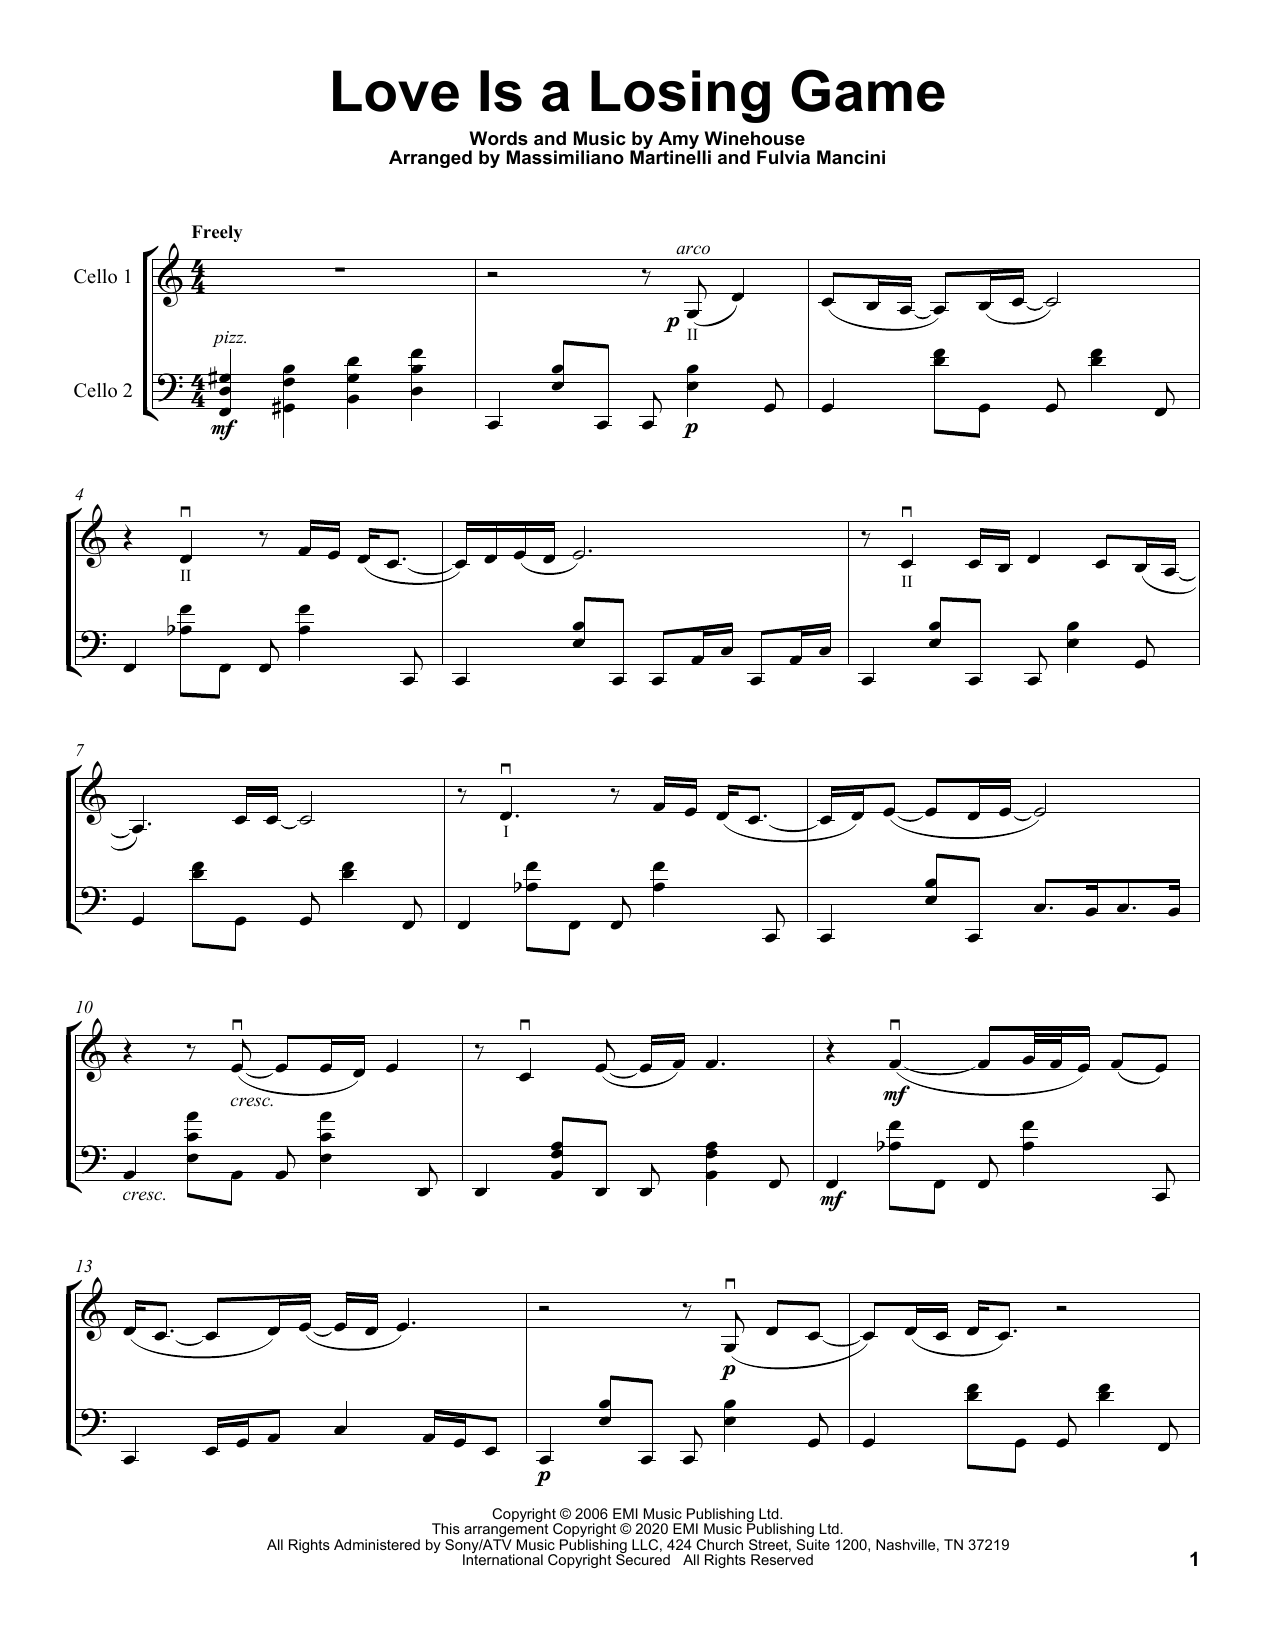 Download Mr. & Mrs. Cello Love Is A Losing Game Sheet Music